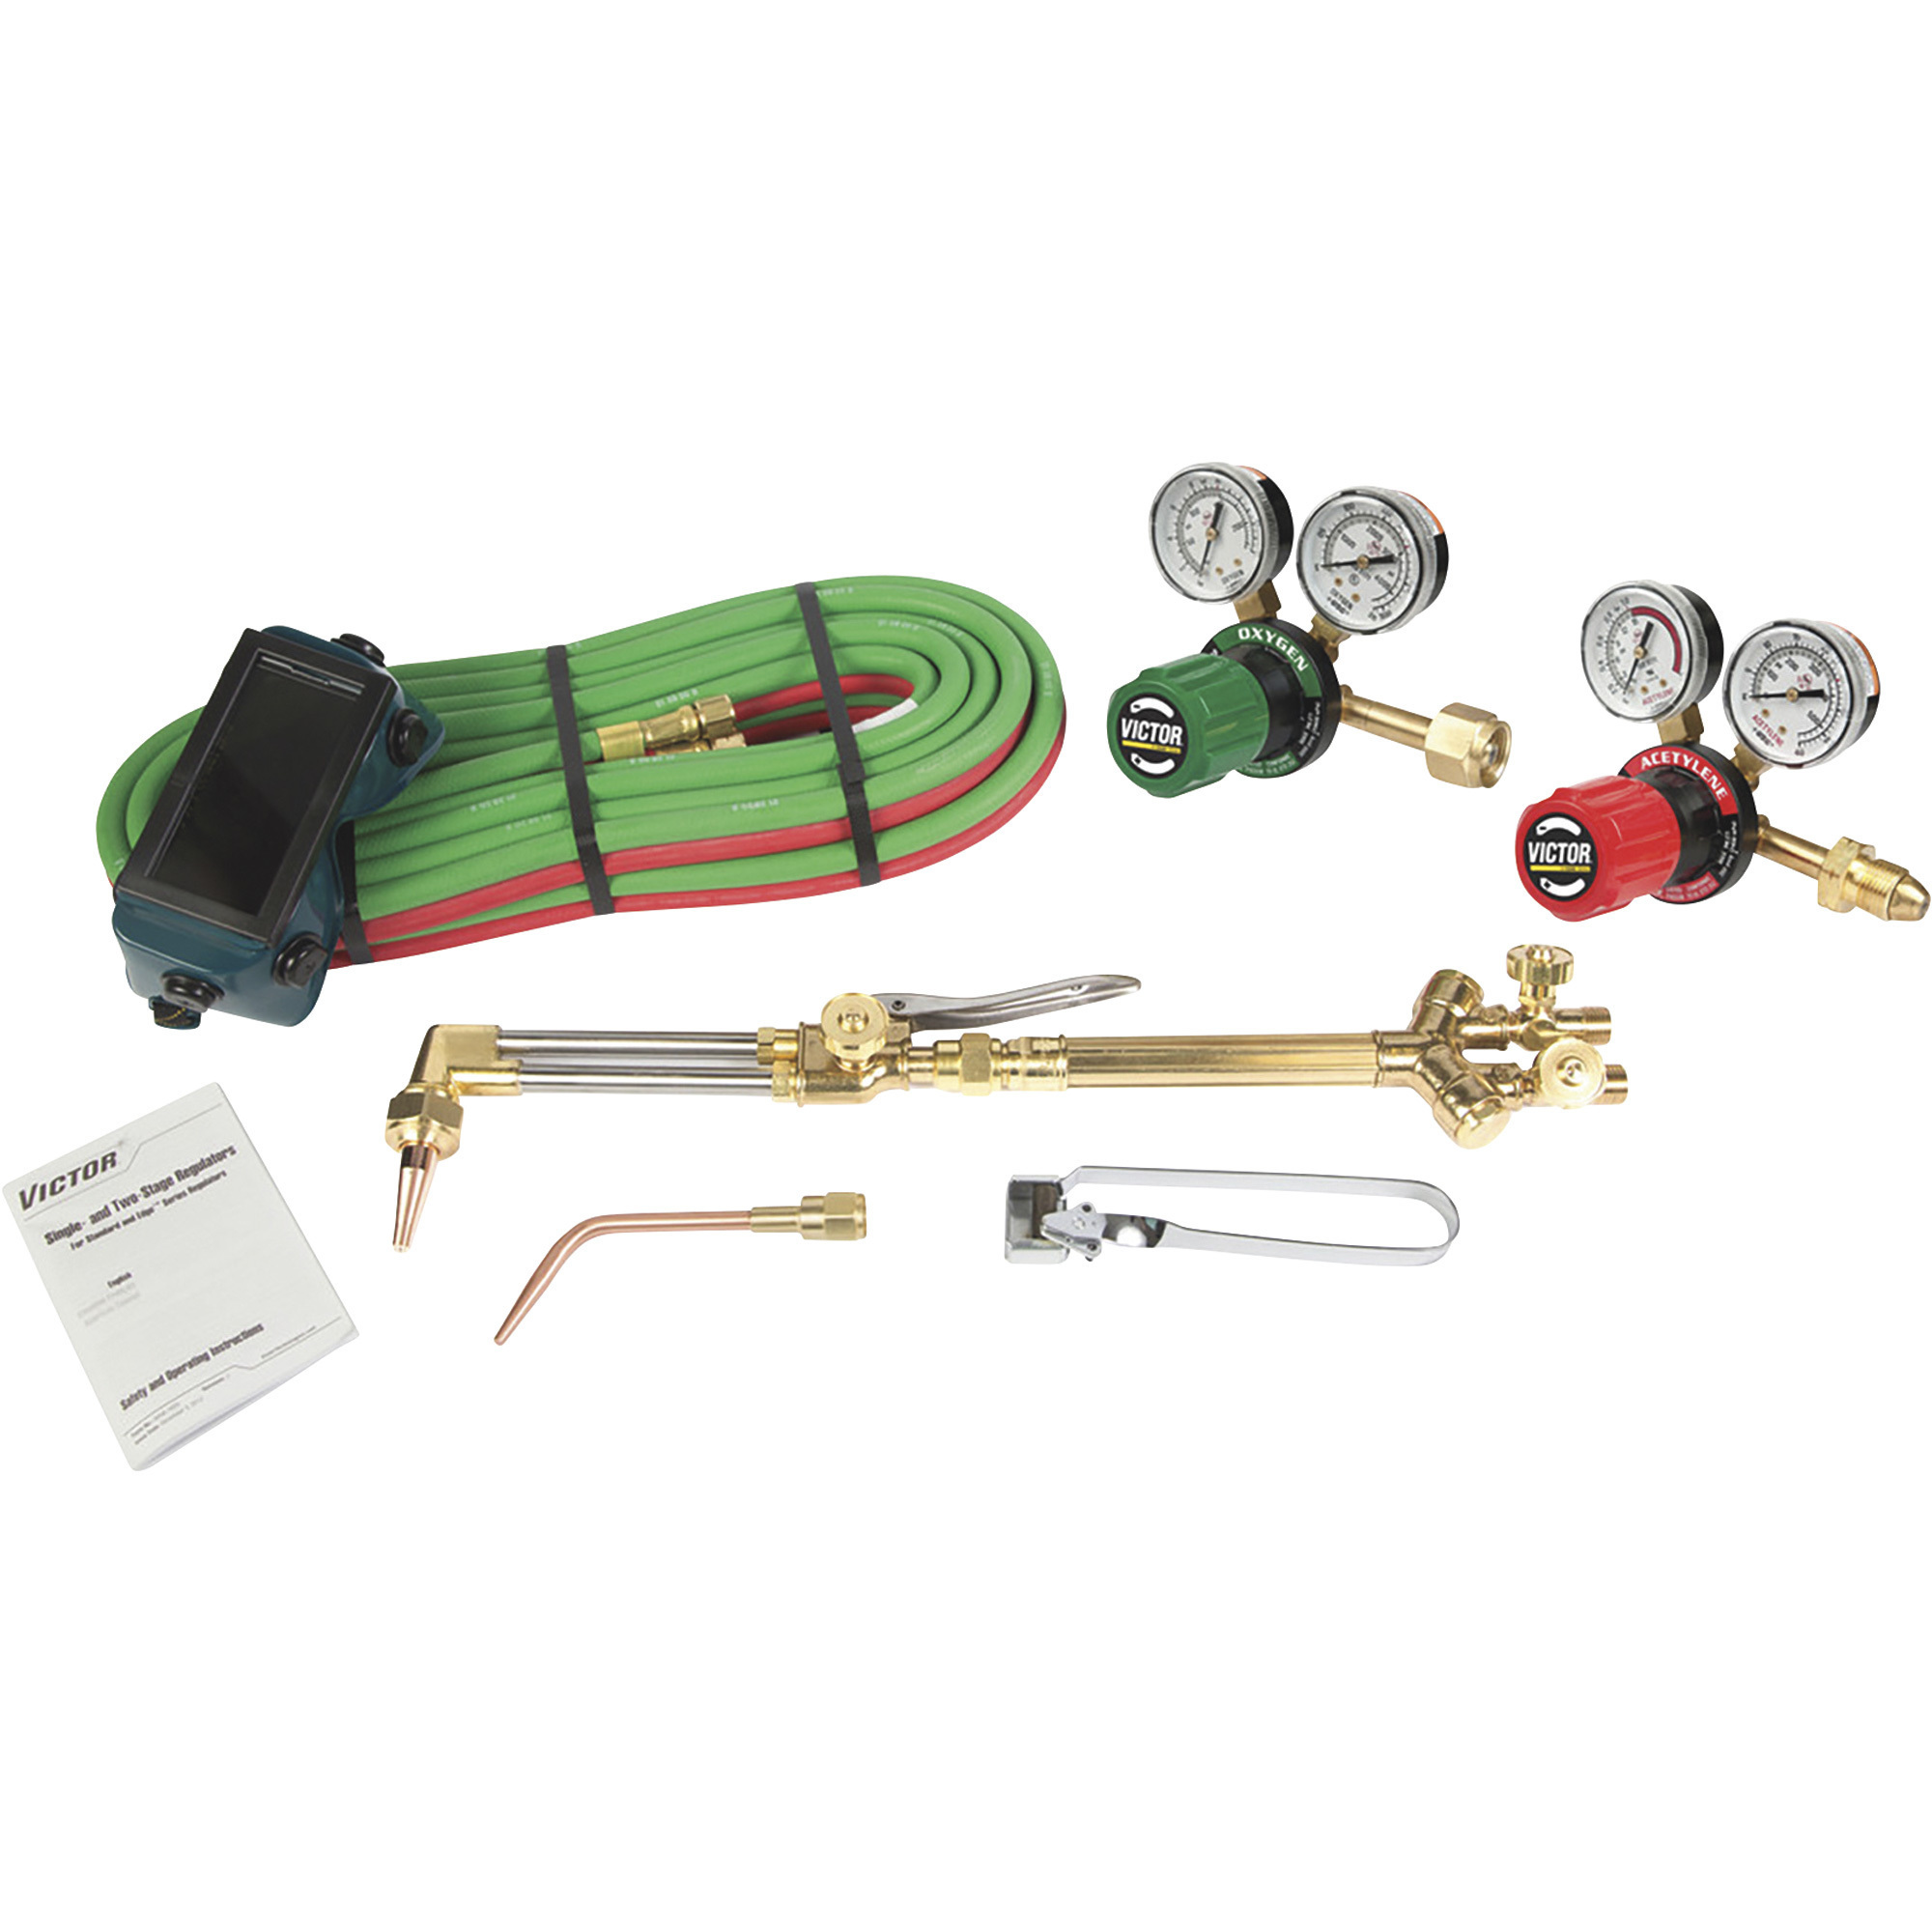 Victor Medalist G250 Classic Welding and Cutting Kit â Model 0384-2580